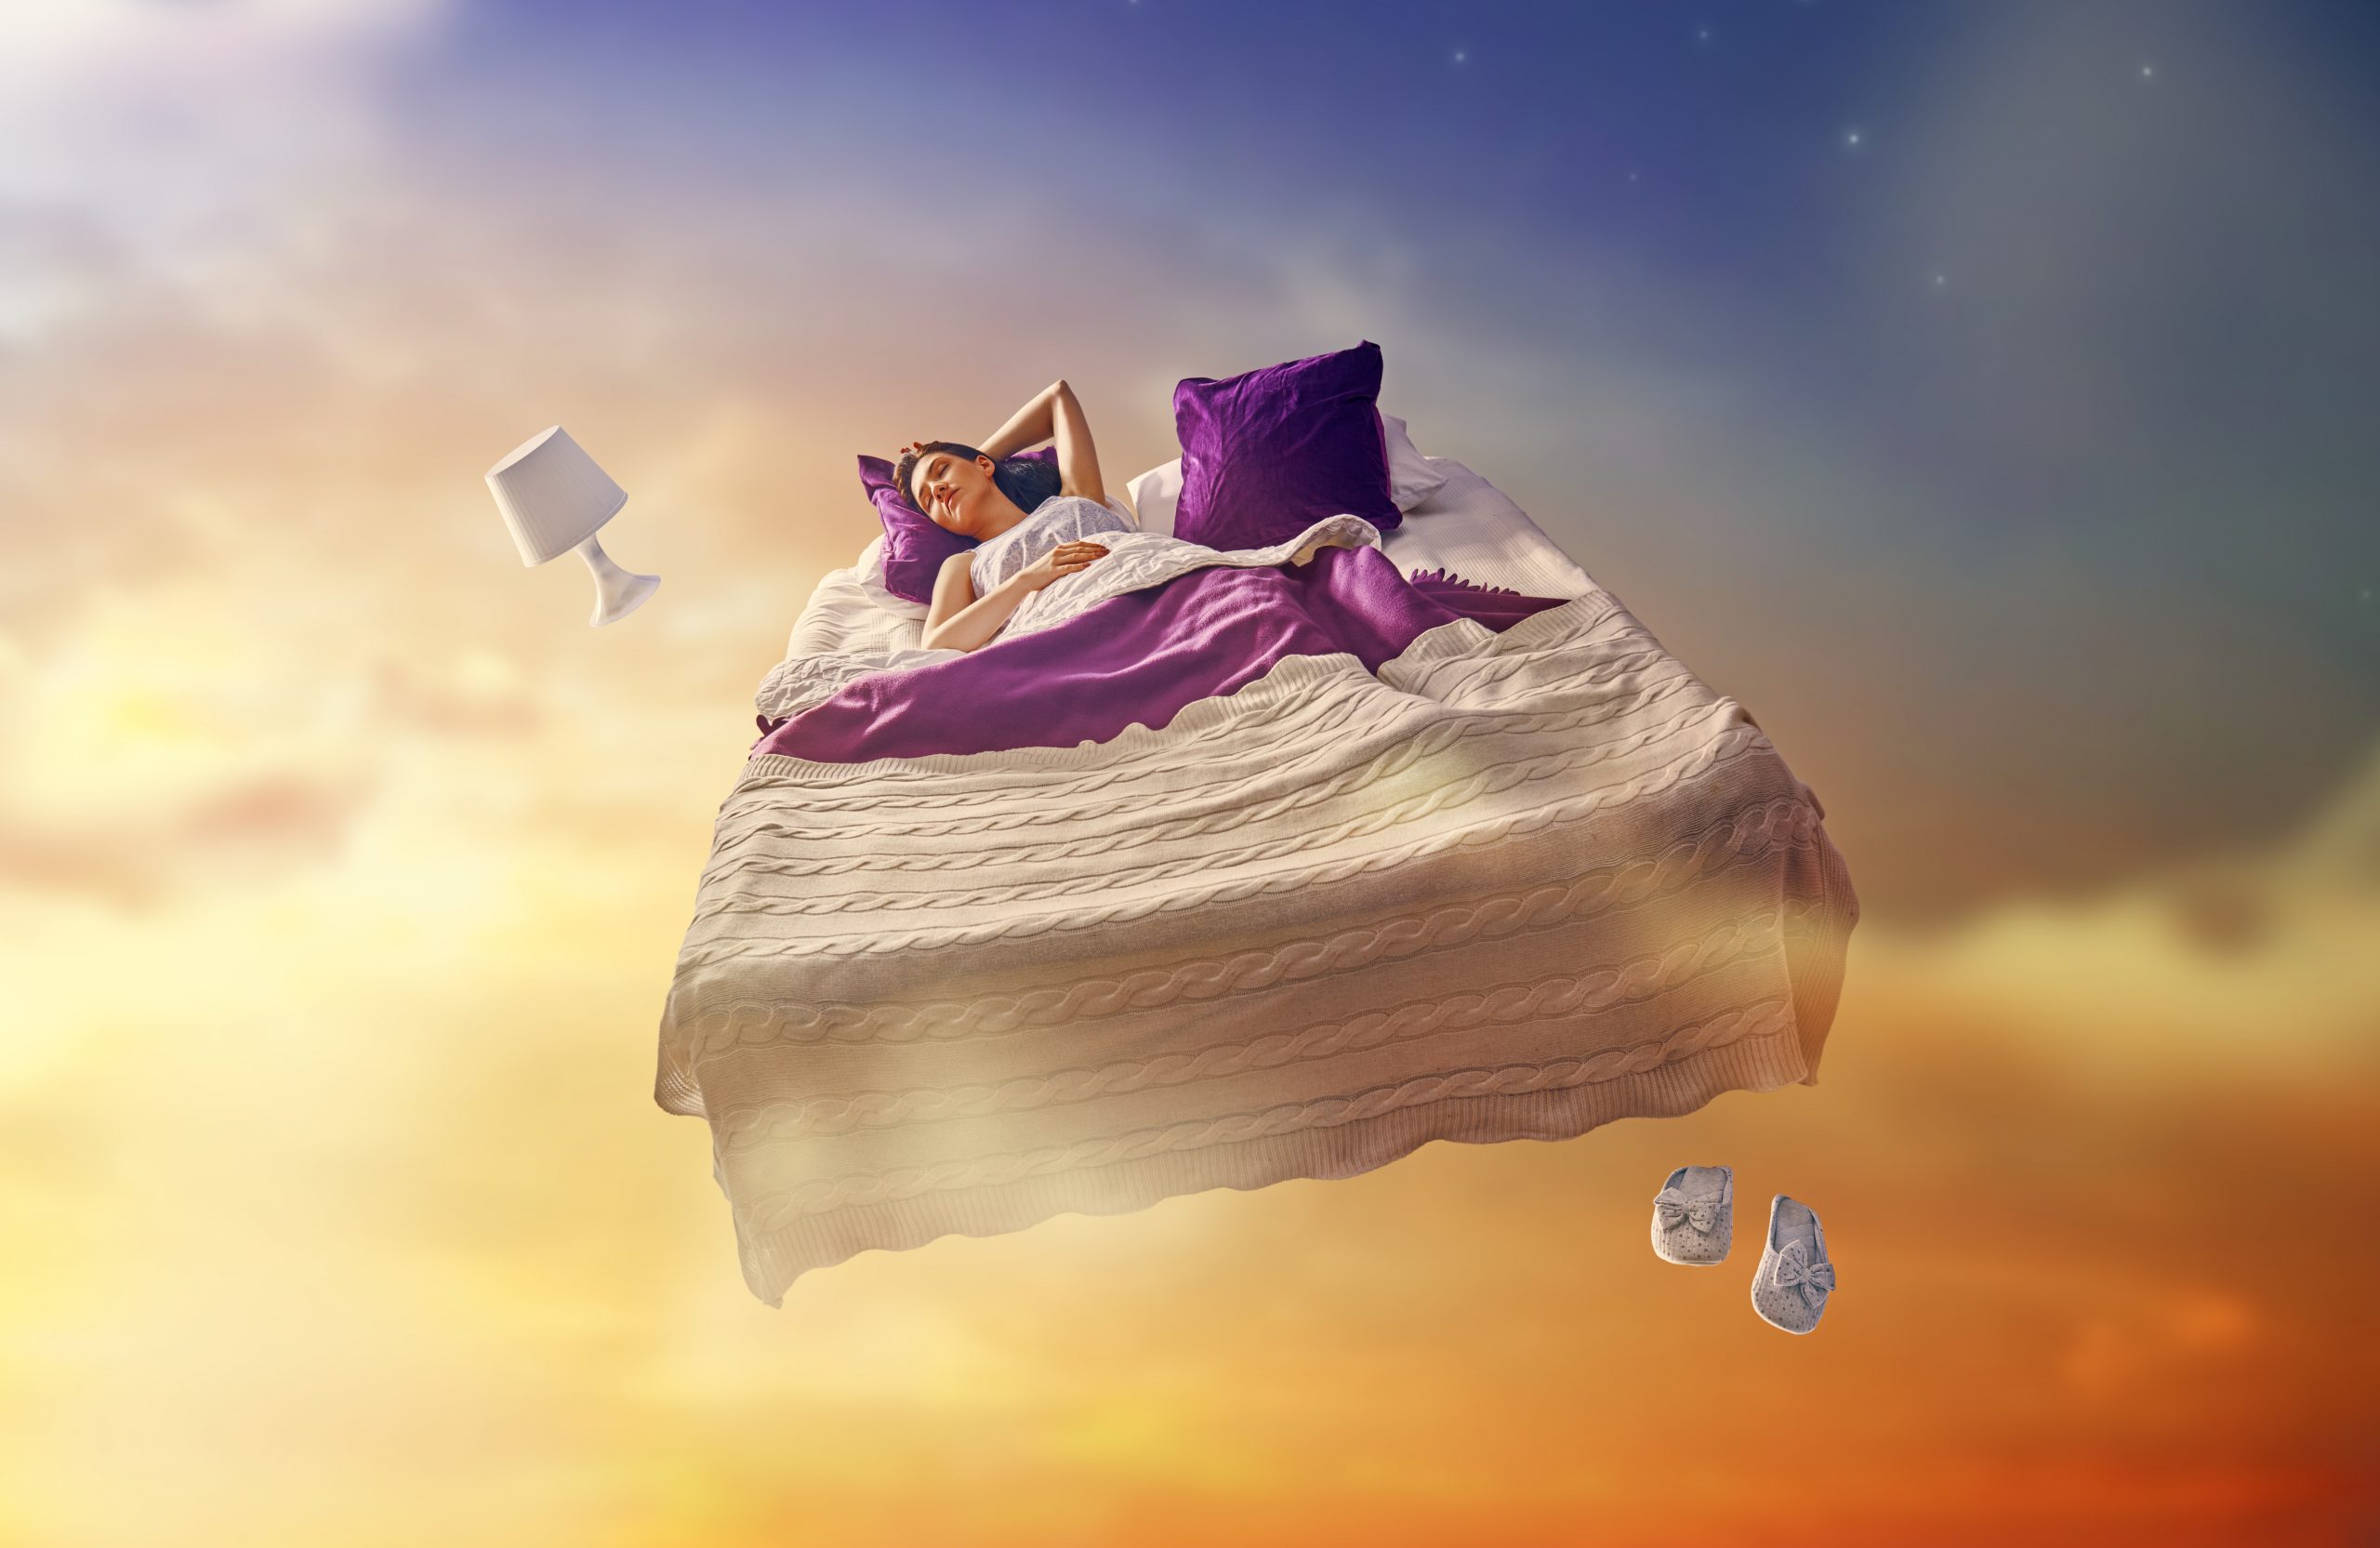 All You Ever Wanted to Know About Dreams and the Growing Number of Dream Apps